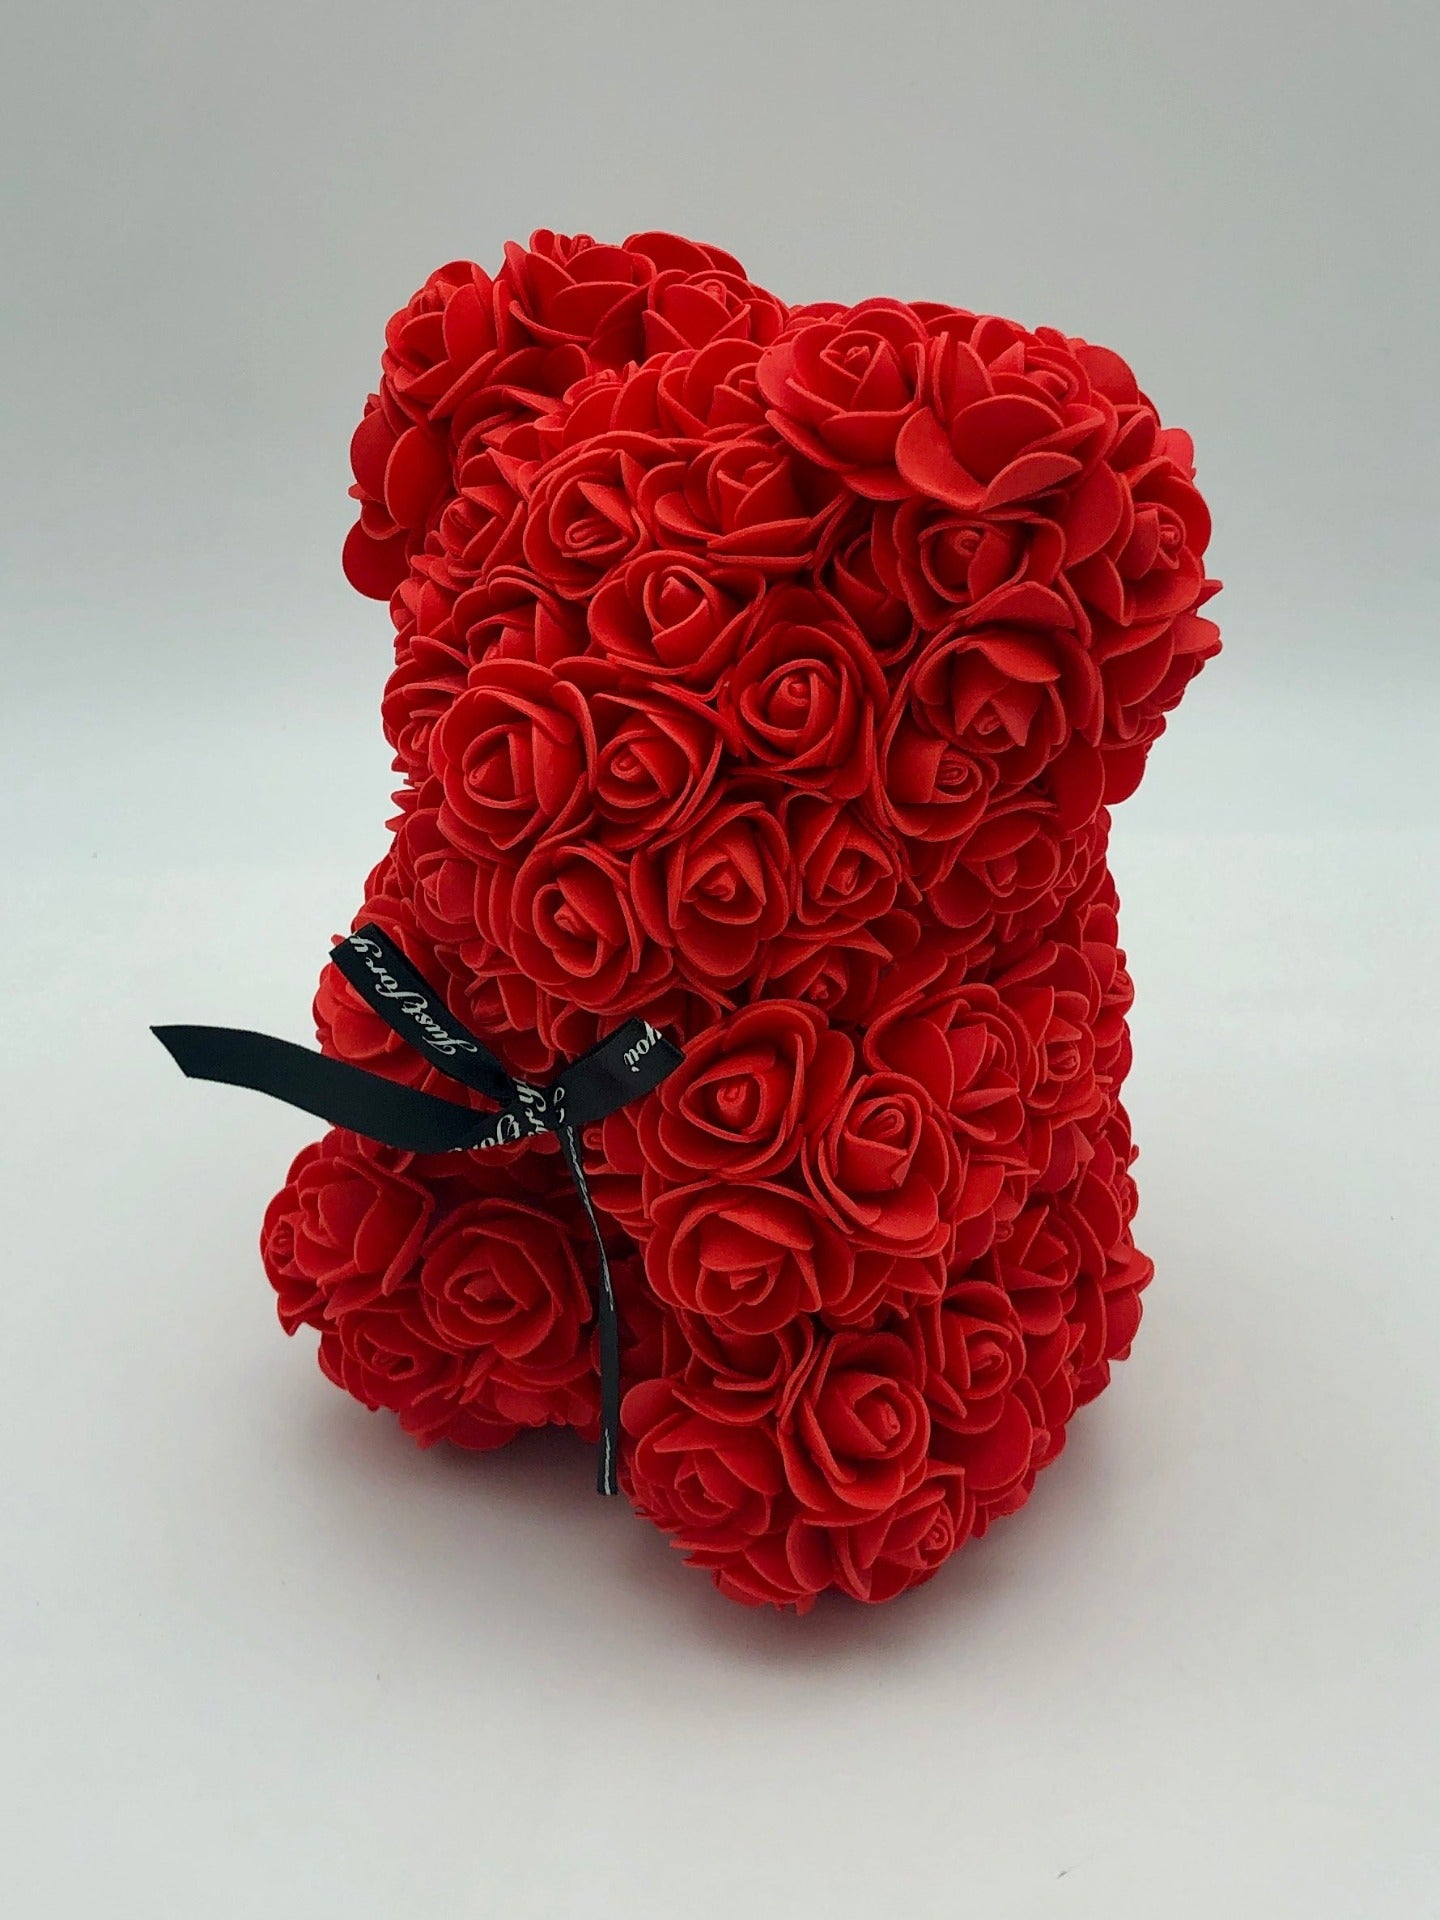 A teddy bear made of red roses, standing upright against a white background. Delivery by Flowers Express Co in Melbourne.